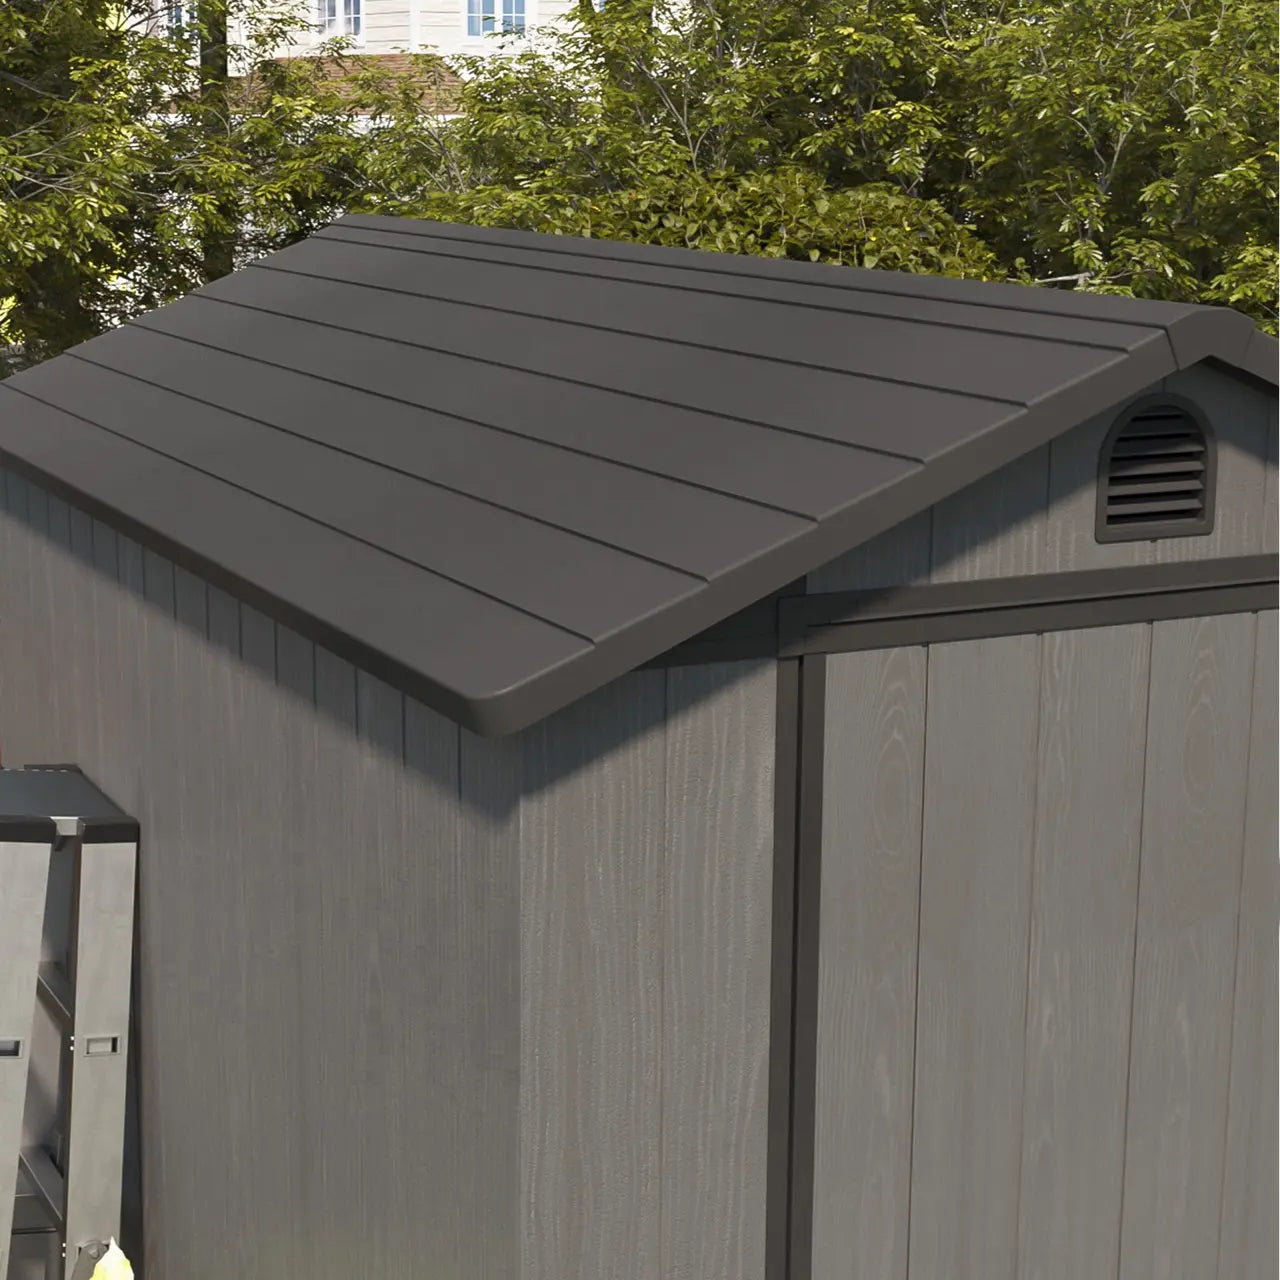 Patiowell 4x6 Plastic Storage Shed-Roof